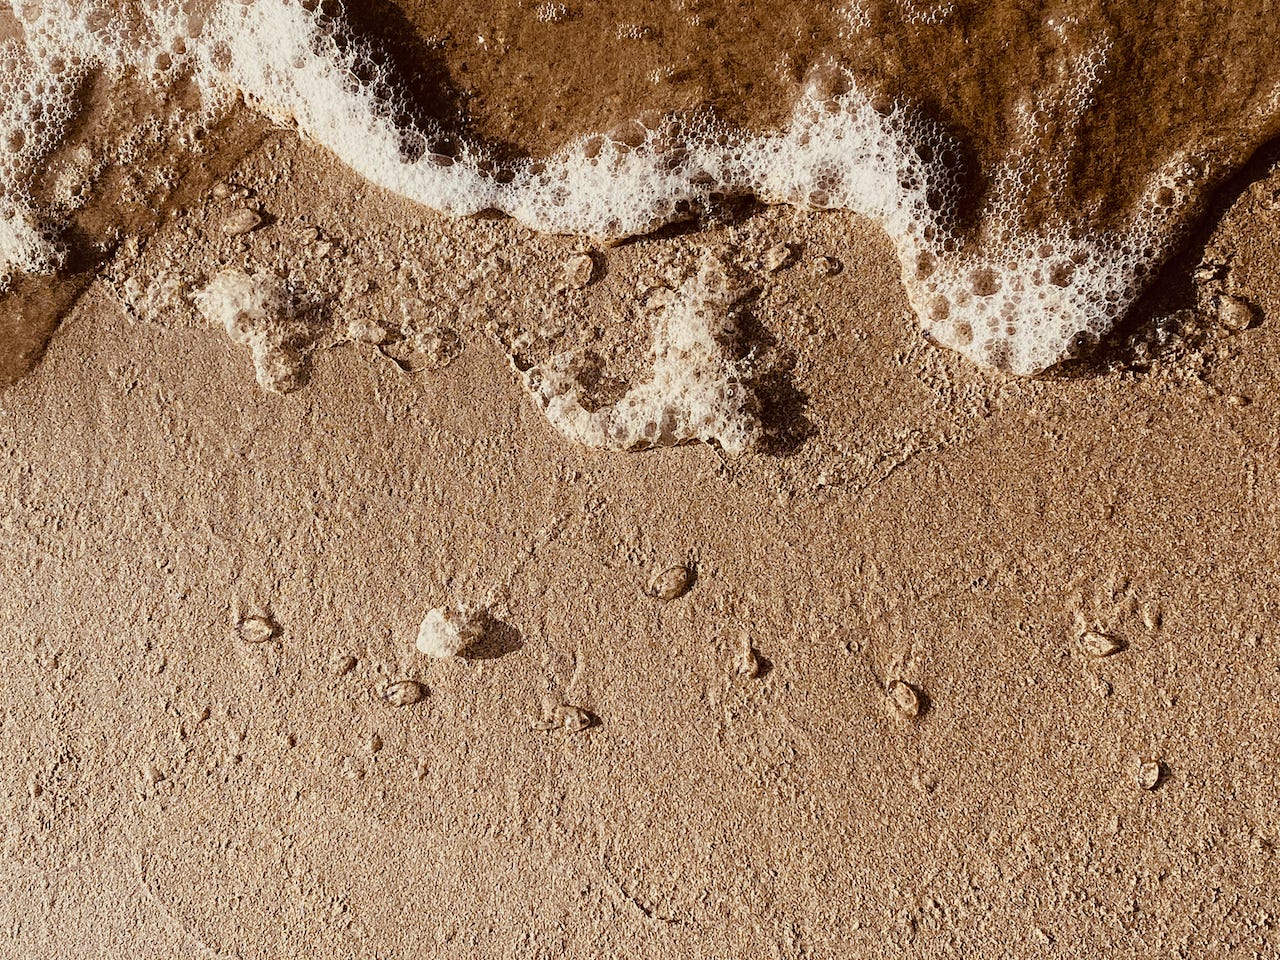 Close up of beach sand, foamy water encroaching from top of frame.